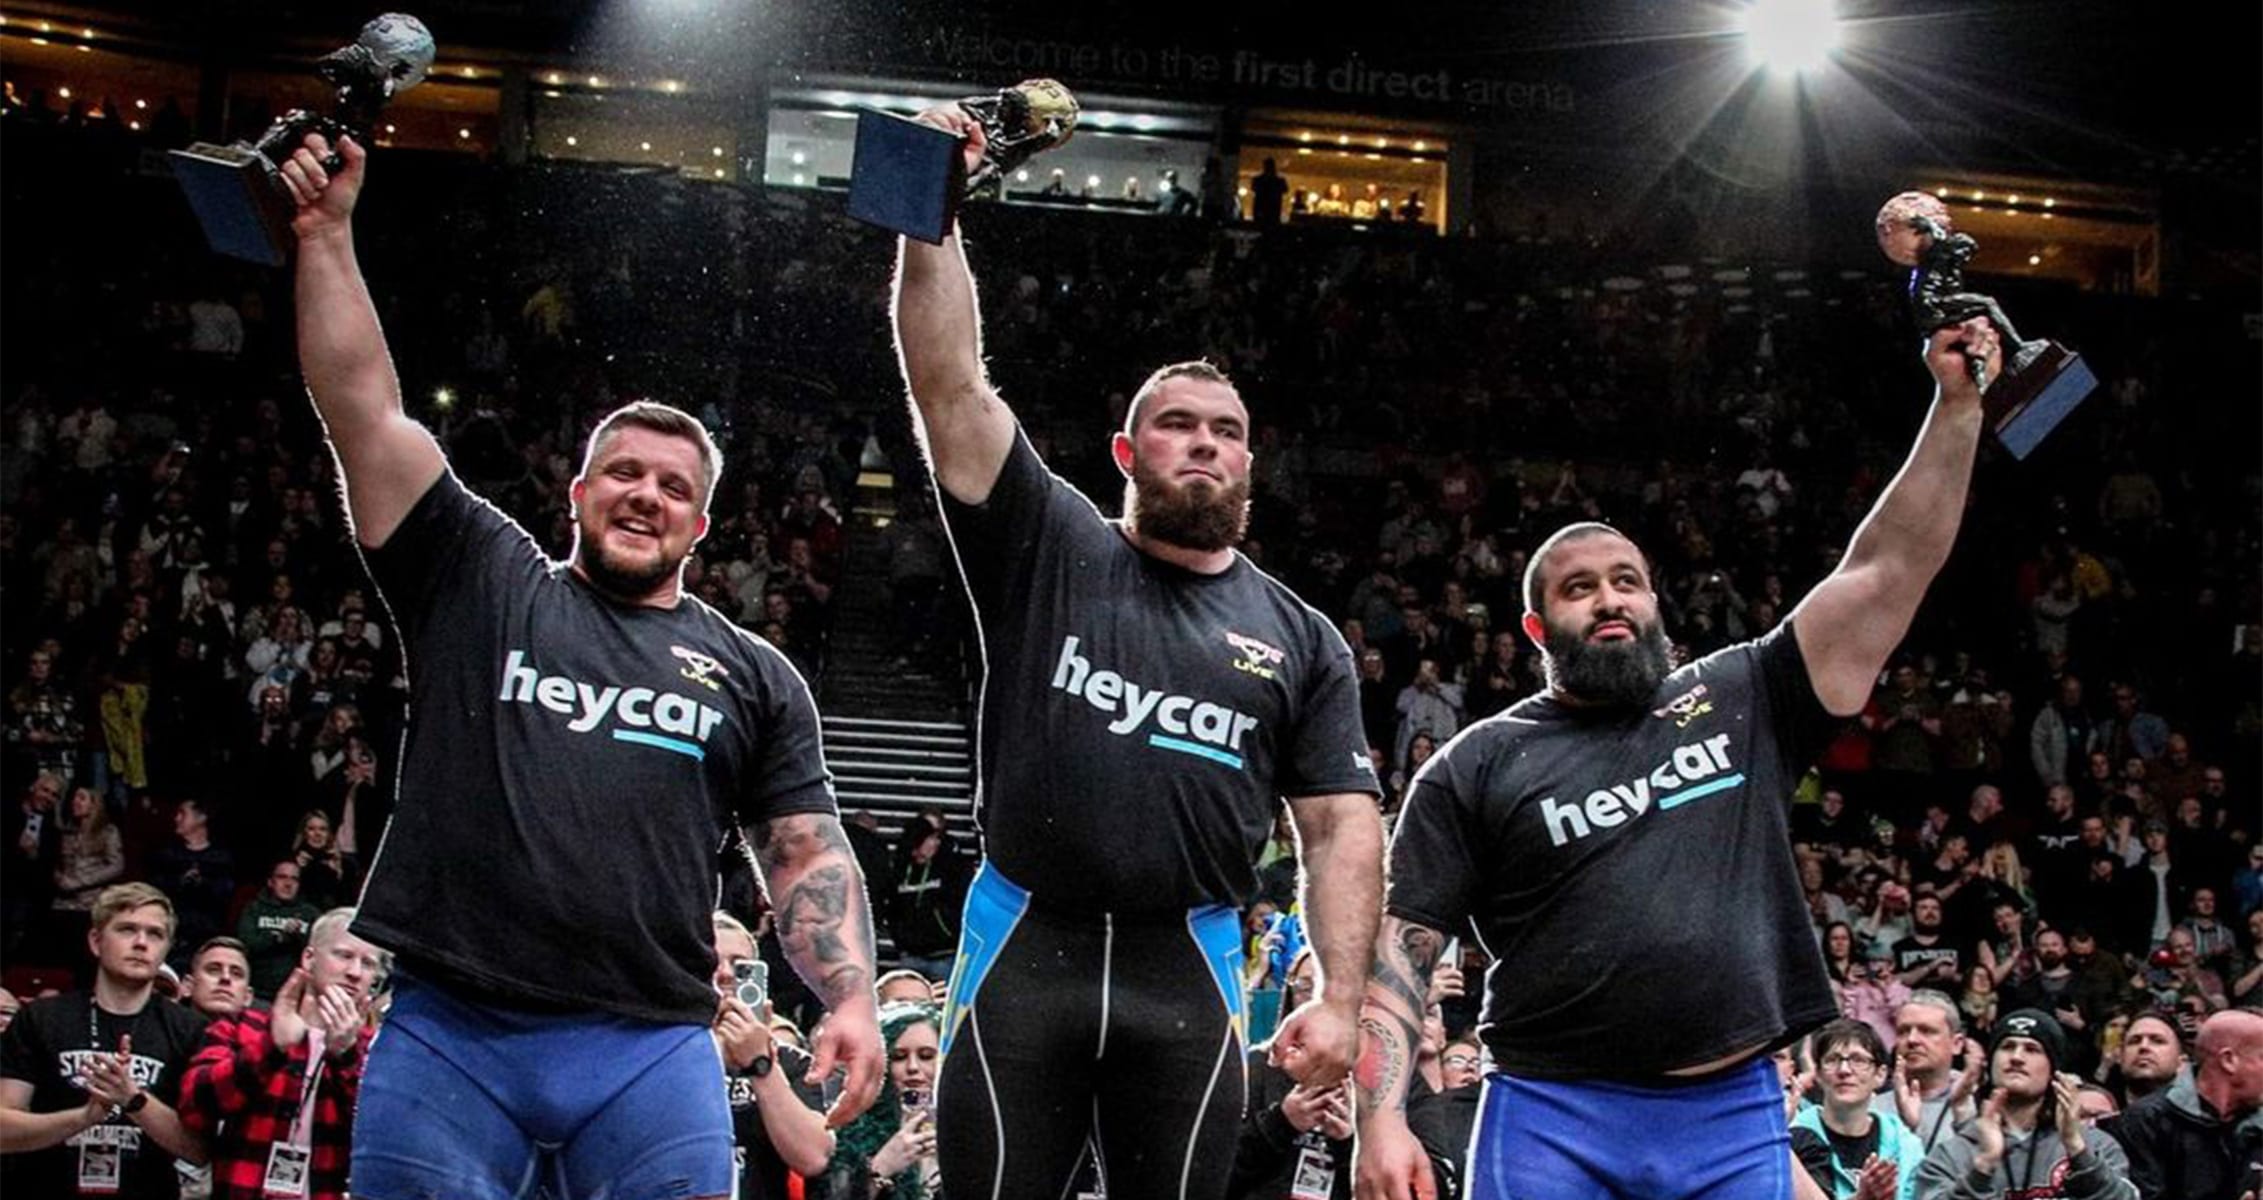 2022 Europe's Strongest Man Results